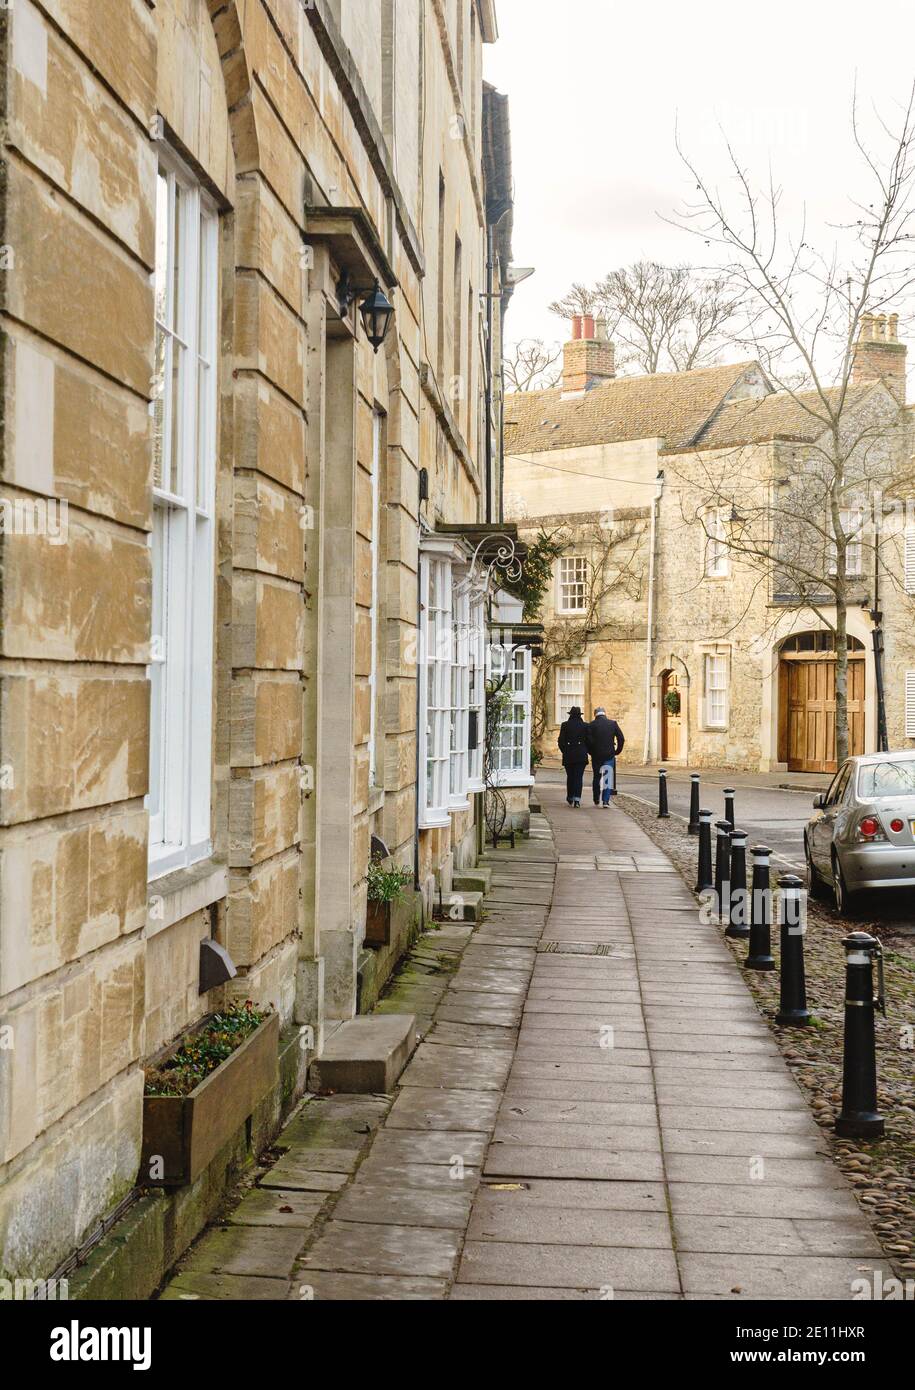 Two men walk down Park Street lined with stone cottages, Woodstock, Oxfordshire. Winter 2020 Stock Photo